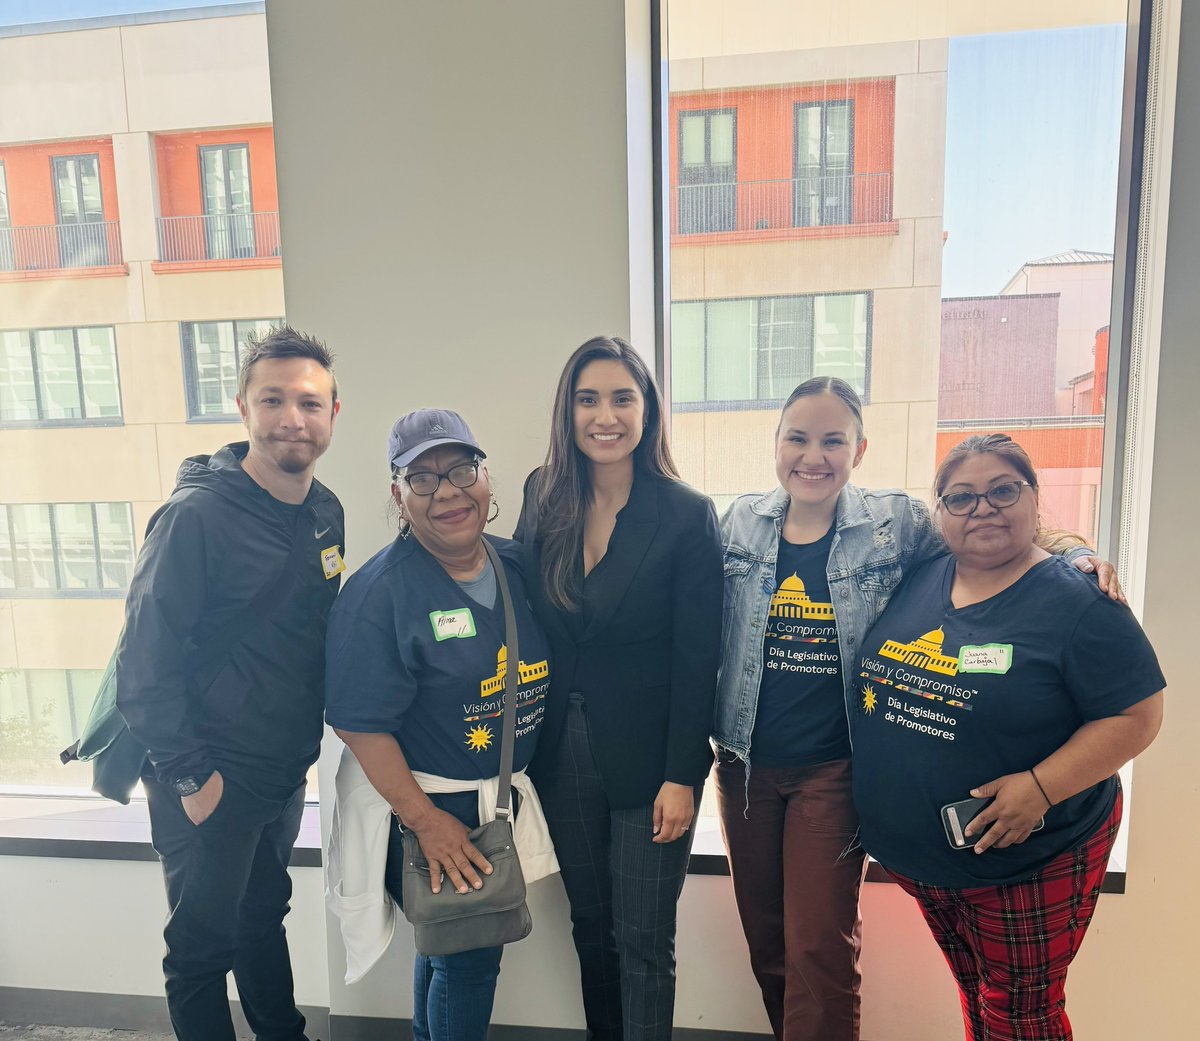 I was thrilled to meet with @promotorasvyc to discuss the work promotores do across California! Promotores serve as liaisons between their communities & healthcare or social service providers by building trust & using cultural competency to build a healthier California. #AD58